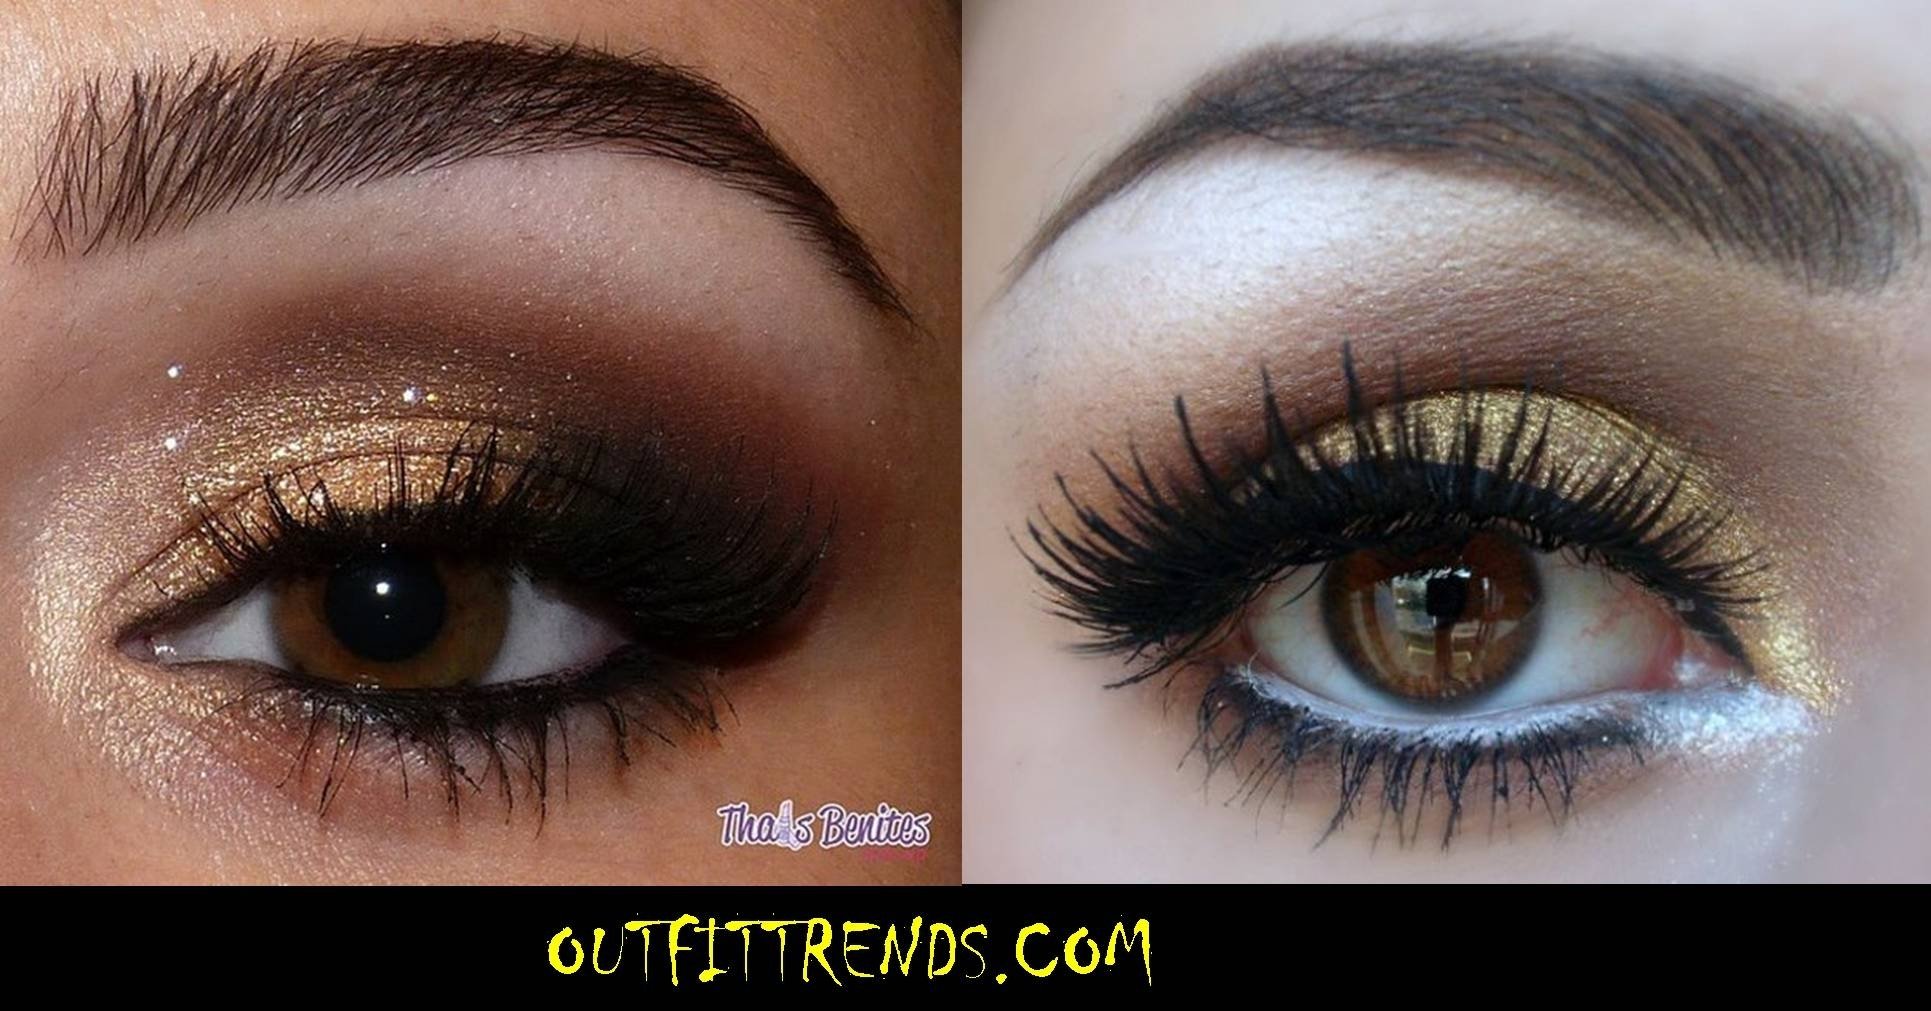 10 Trendy Make Up Ideas For Brown Eyes and stylish eye makeup ideas for brown eyes 2022